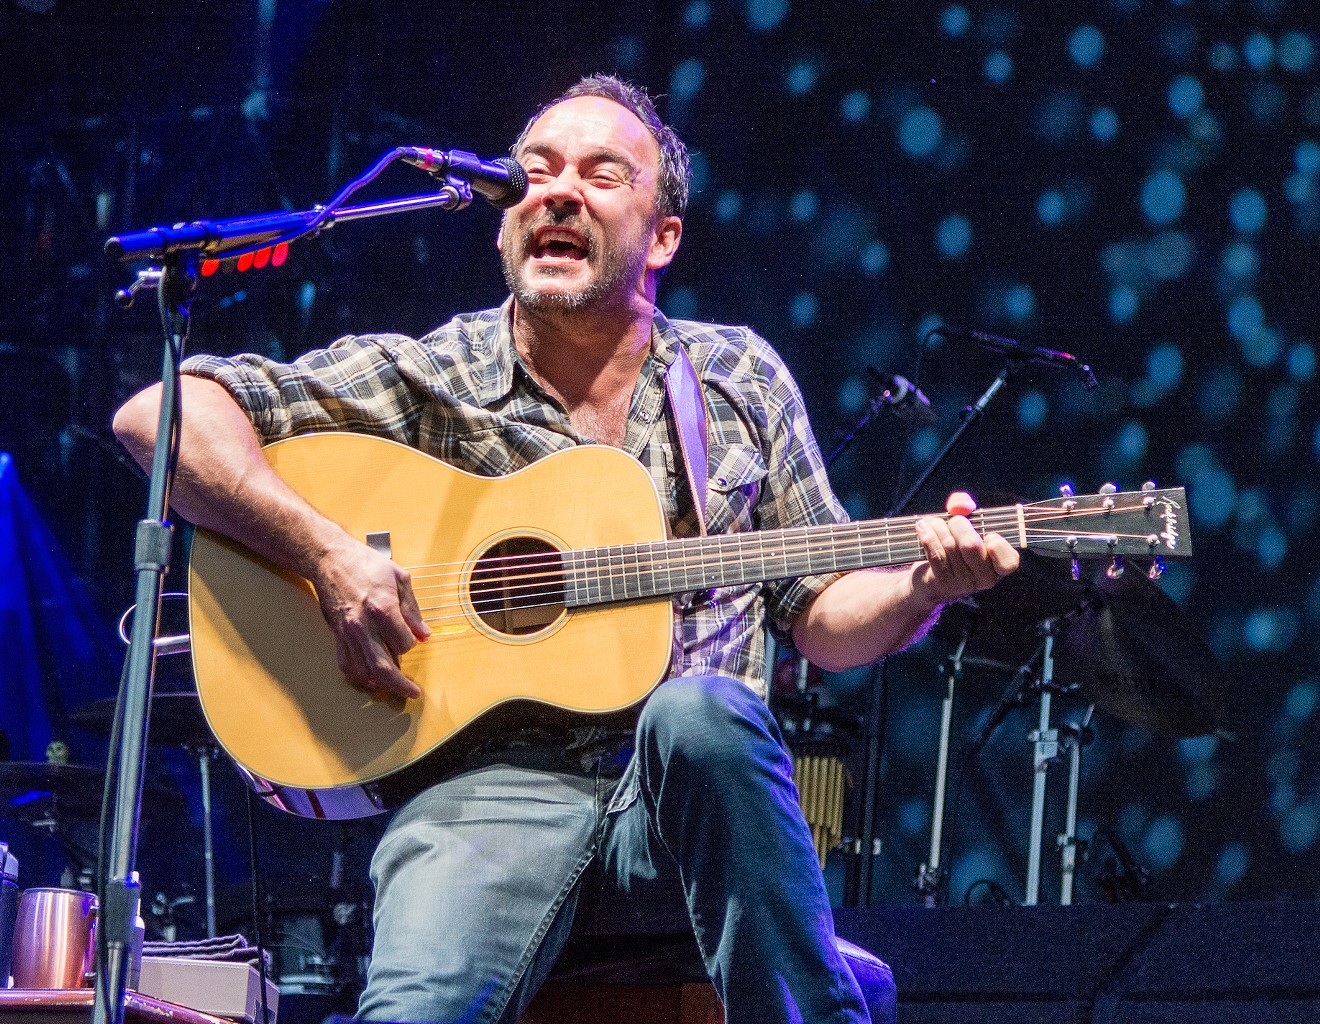 The perennial Dave Matthews will be making his annual visit to Dallas.